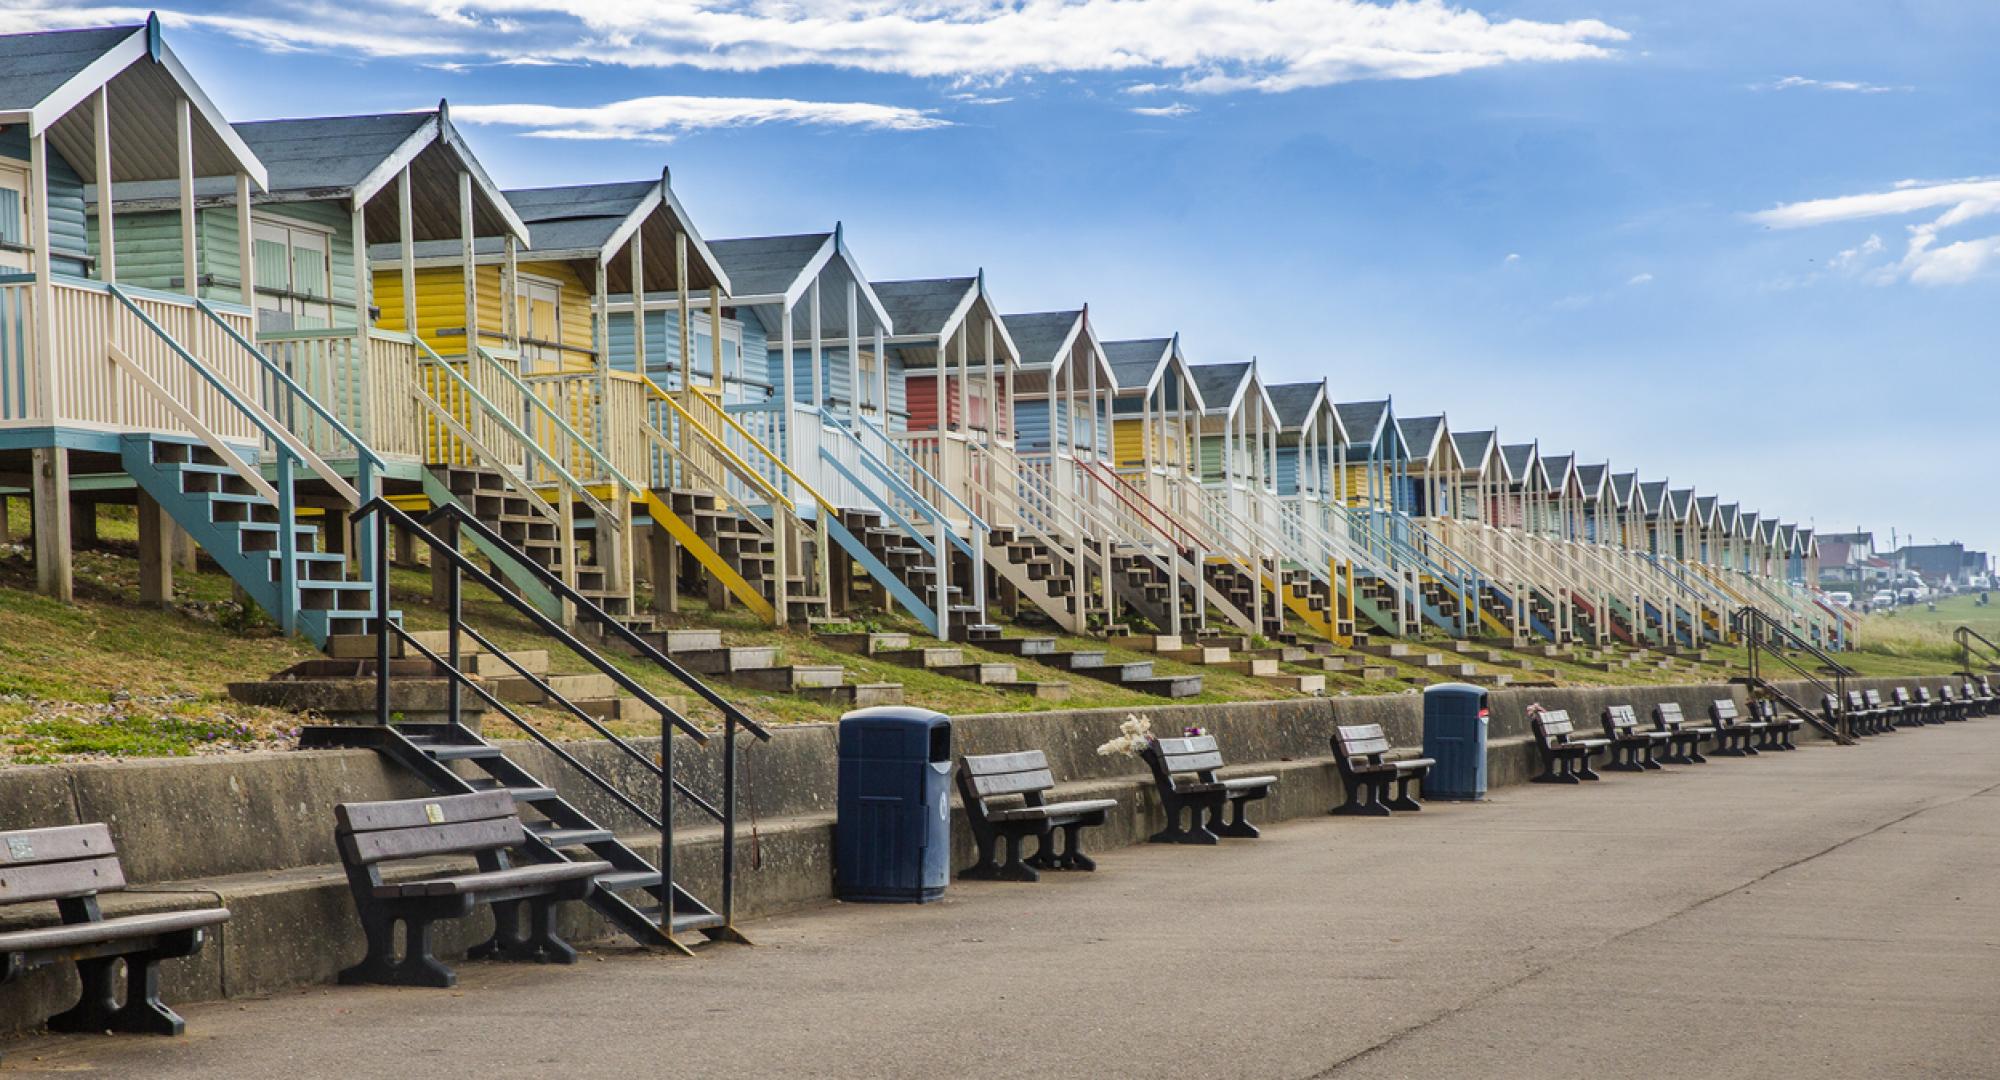 Beach huts on the Isle of Sheppey